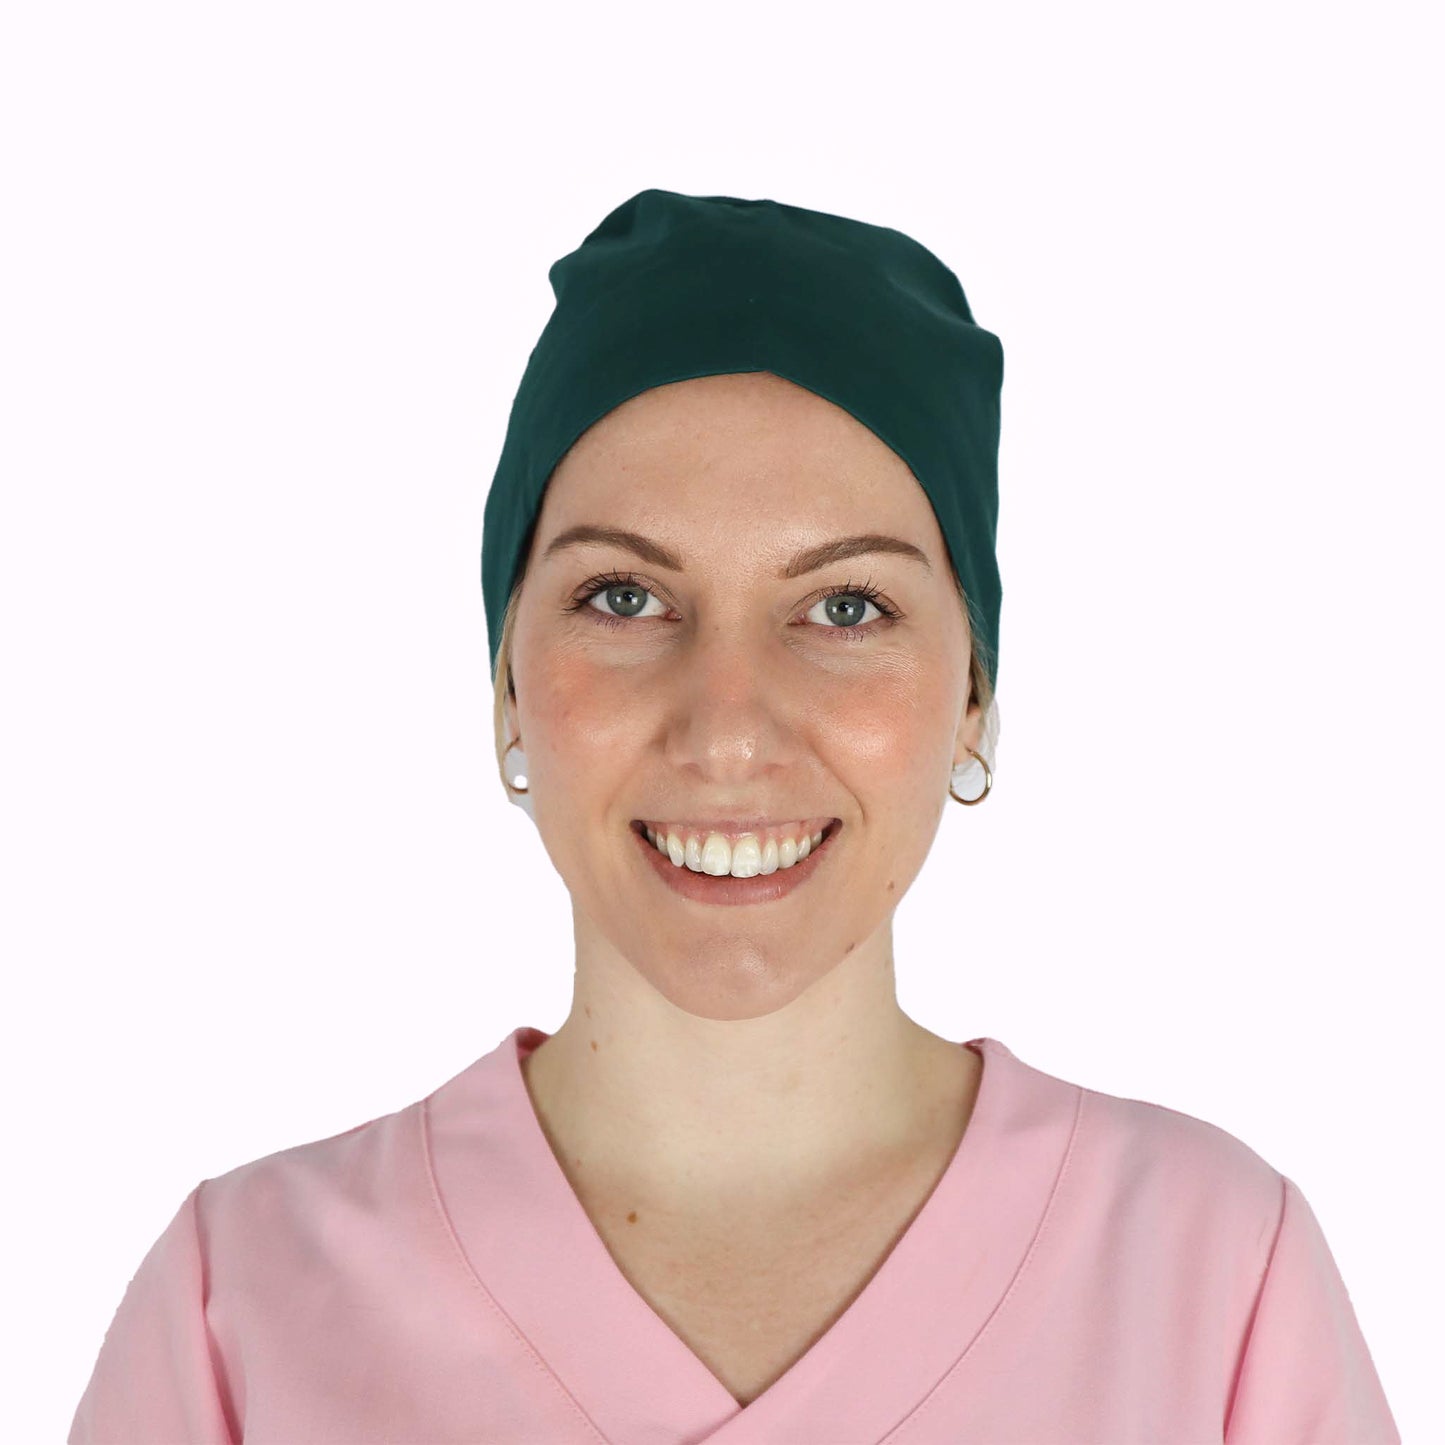 Fit Right Medical Scrubs Medical Scrub Cap in Forest Green